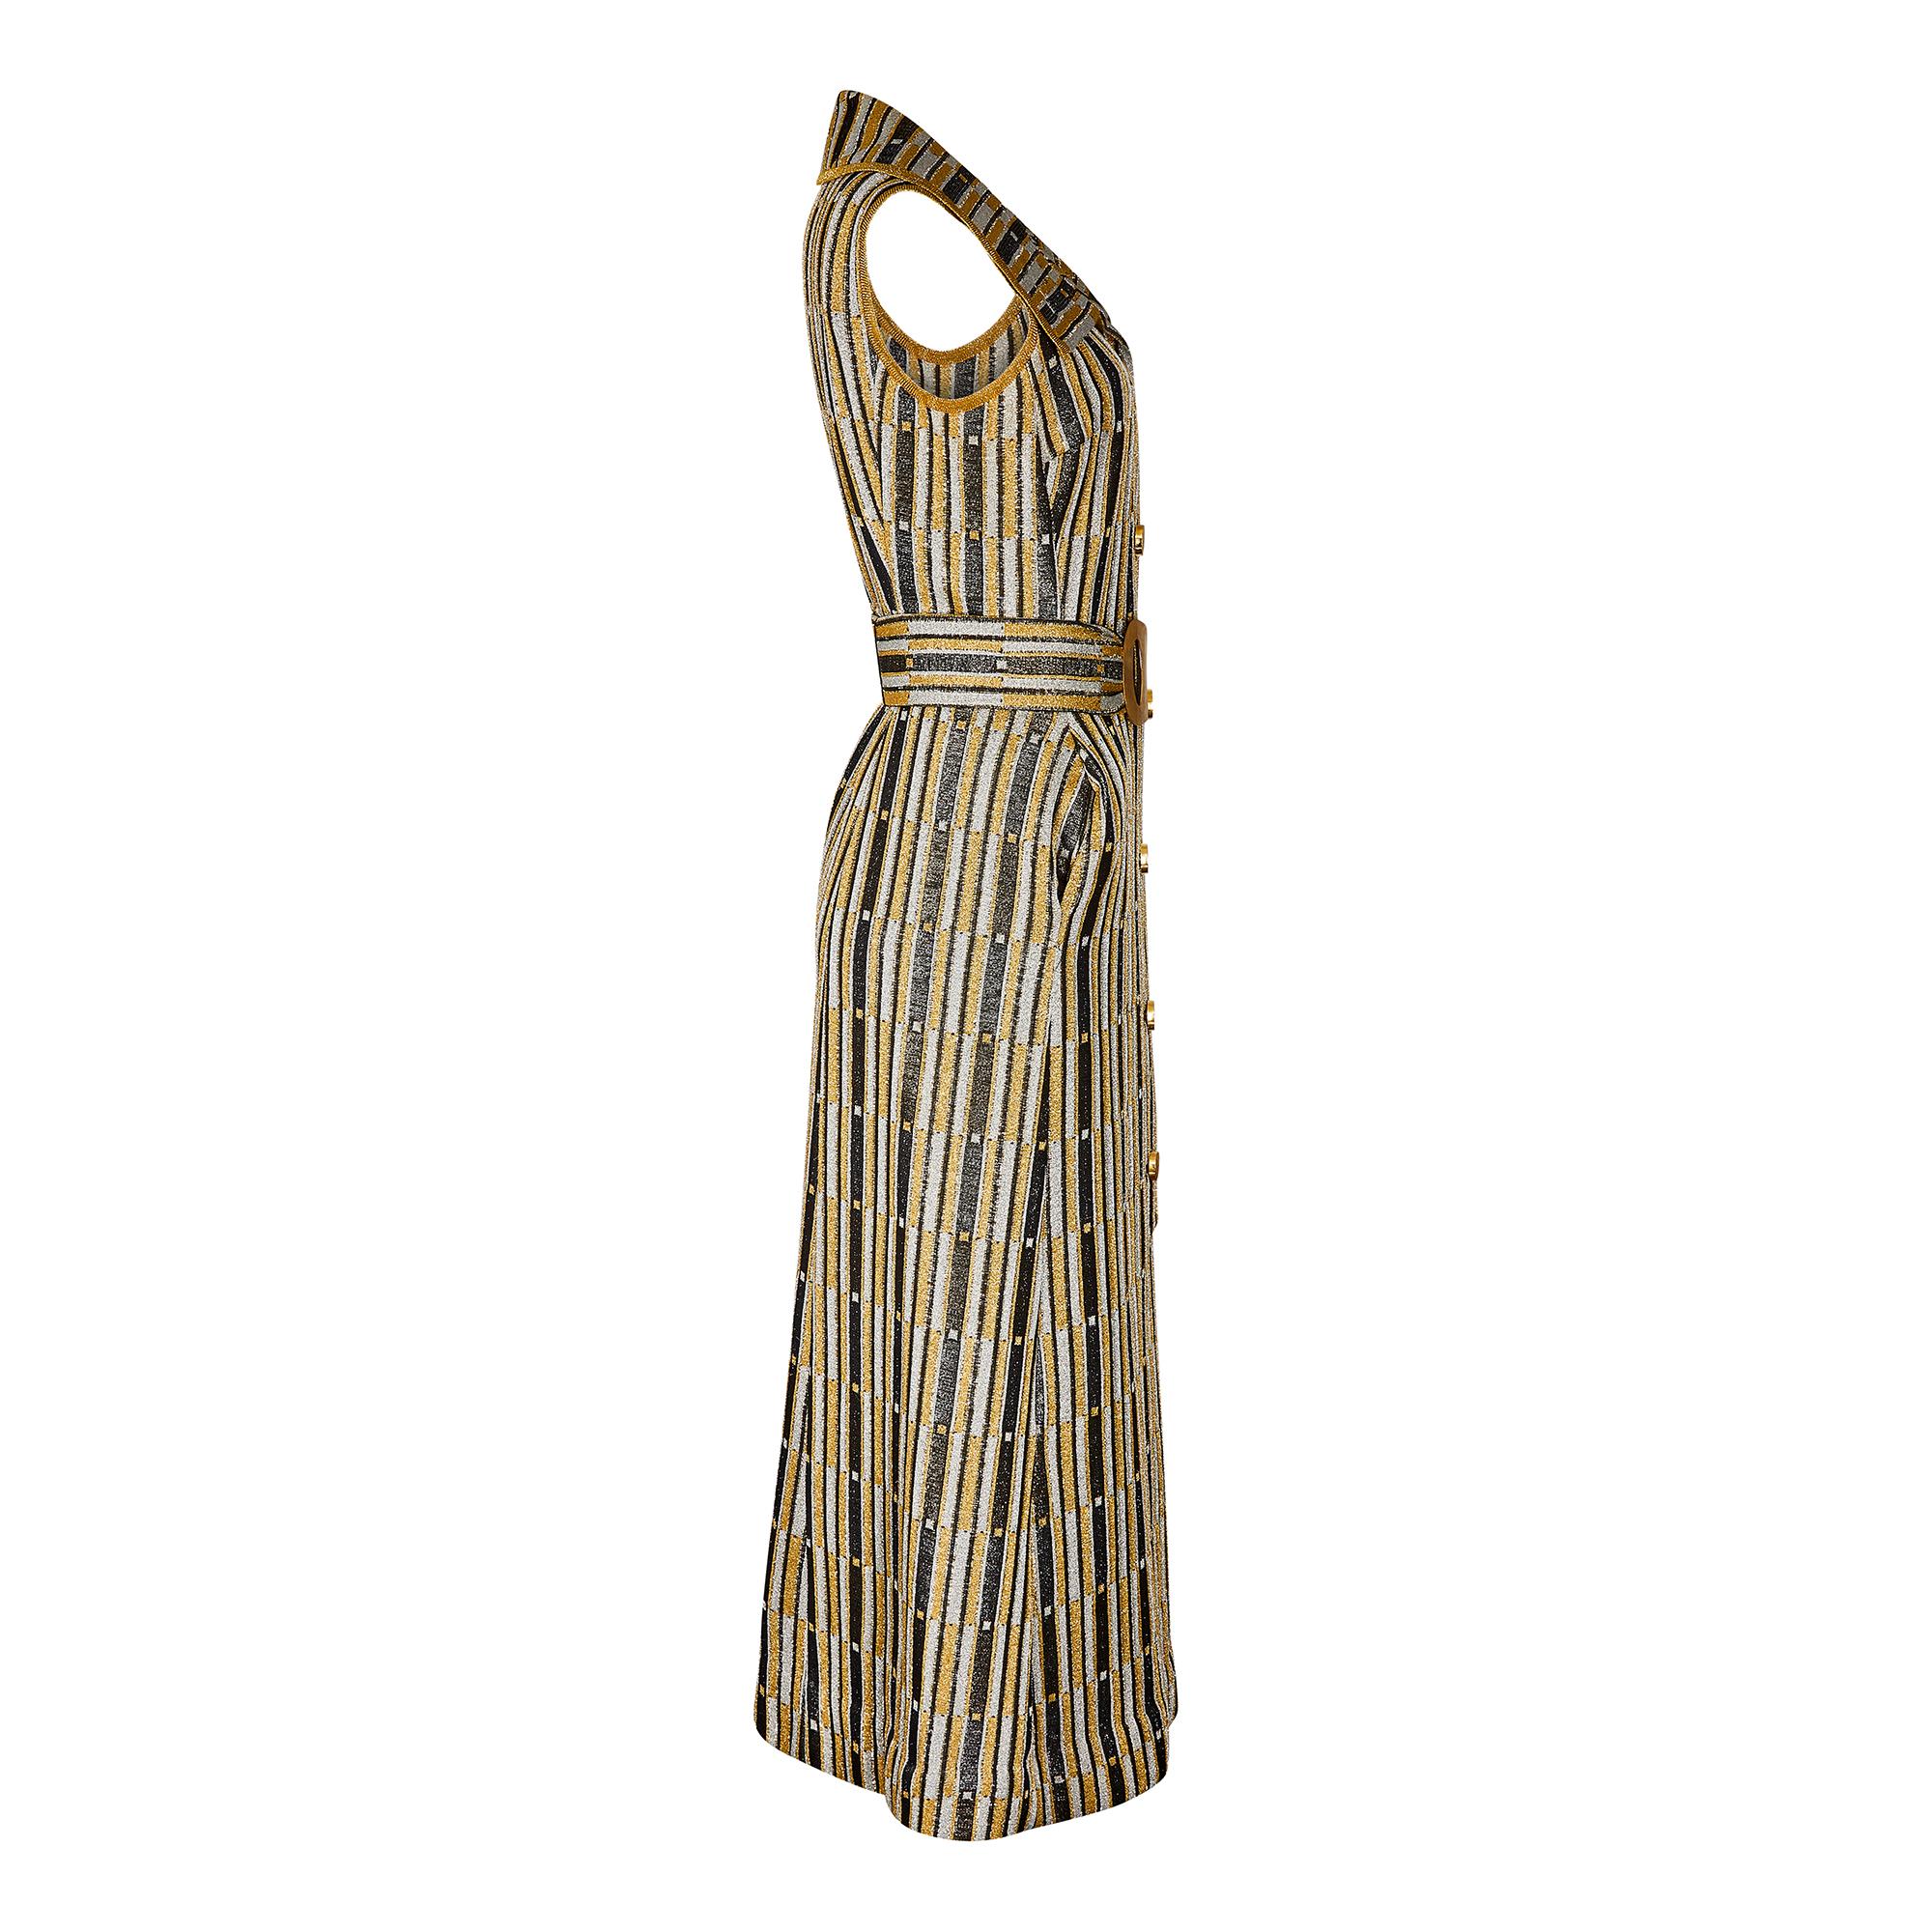 Very striking 1970s couture made Art Deco inspired dress made from a metallic lame knit knit in a gold, silver and black geometric block print. The dress has a wide straight collar, is sleeveless and front fastening. The button stand hosts some